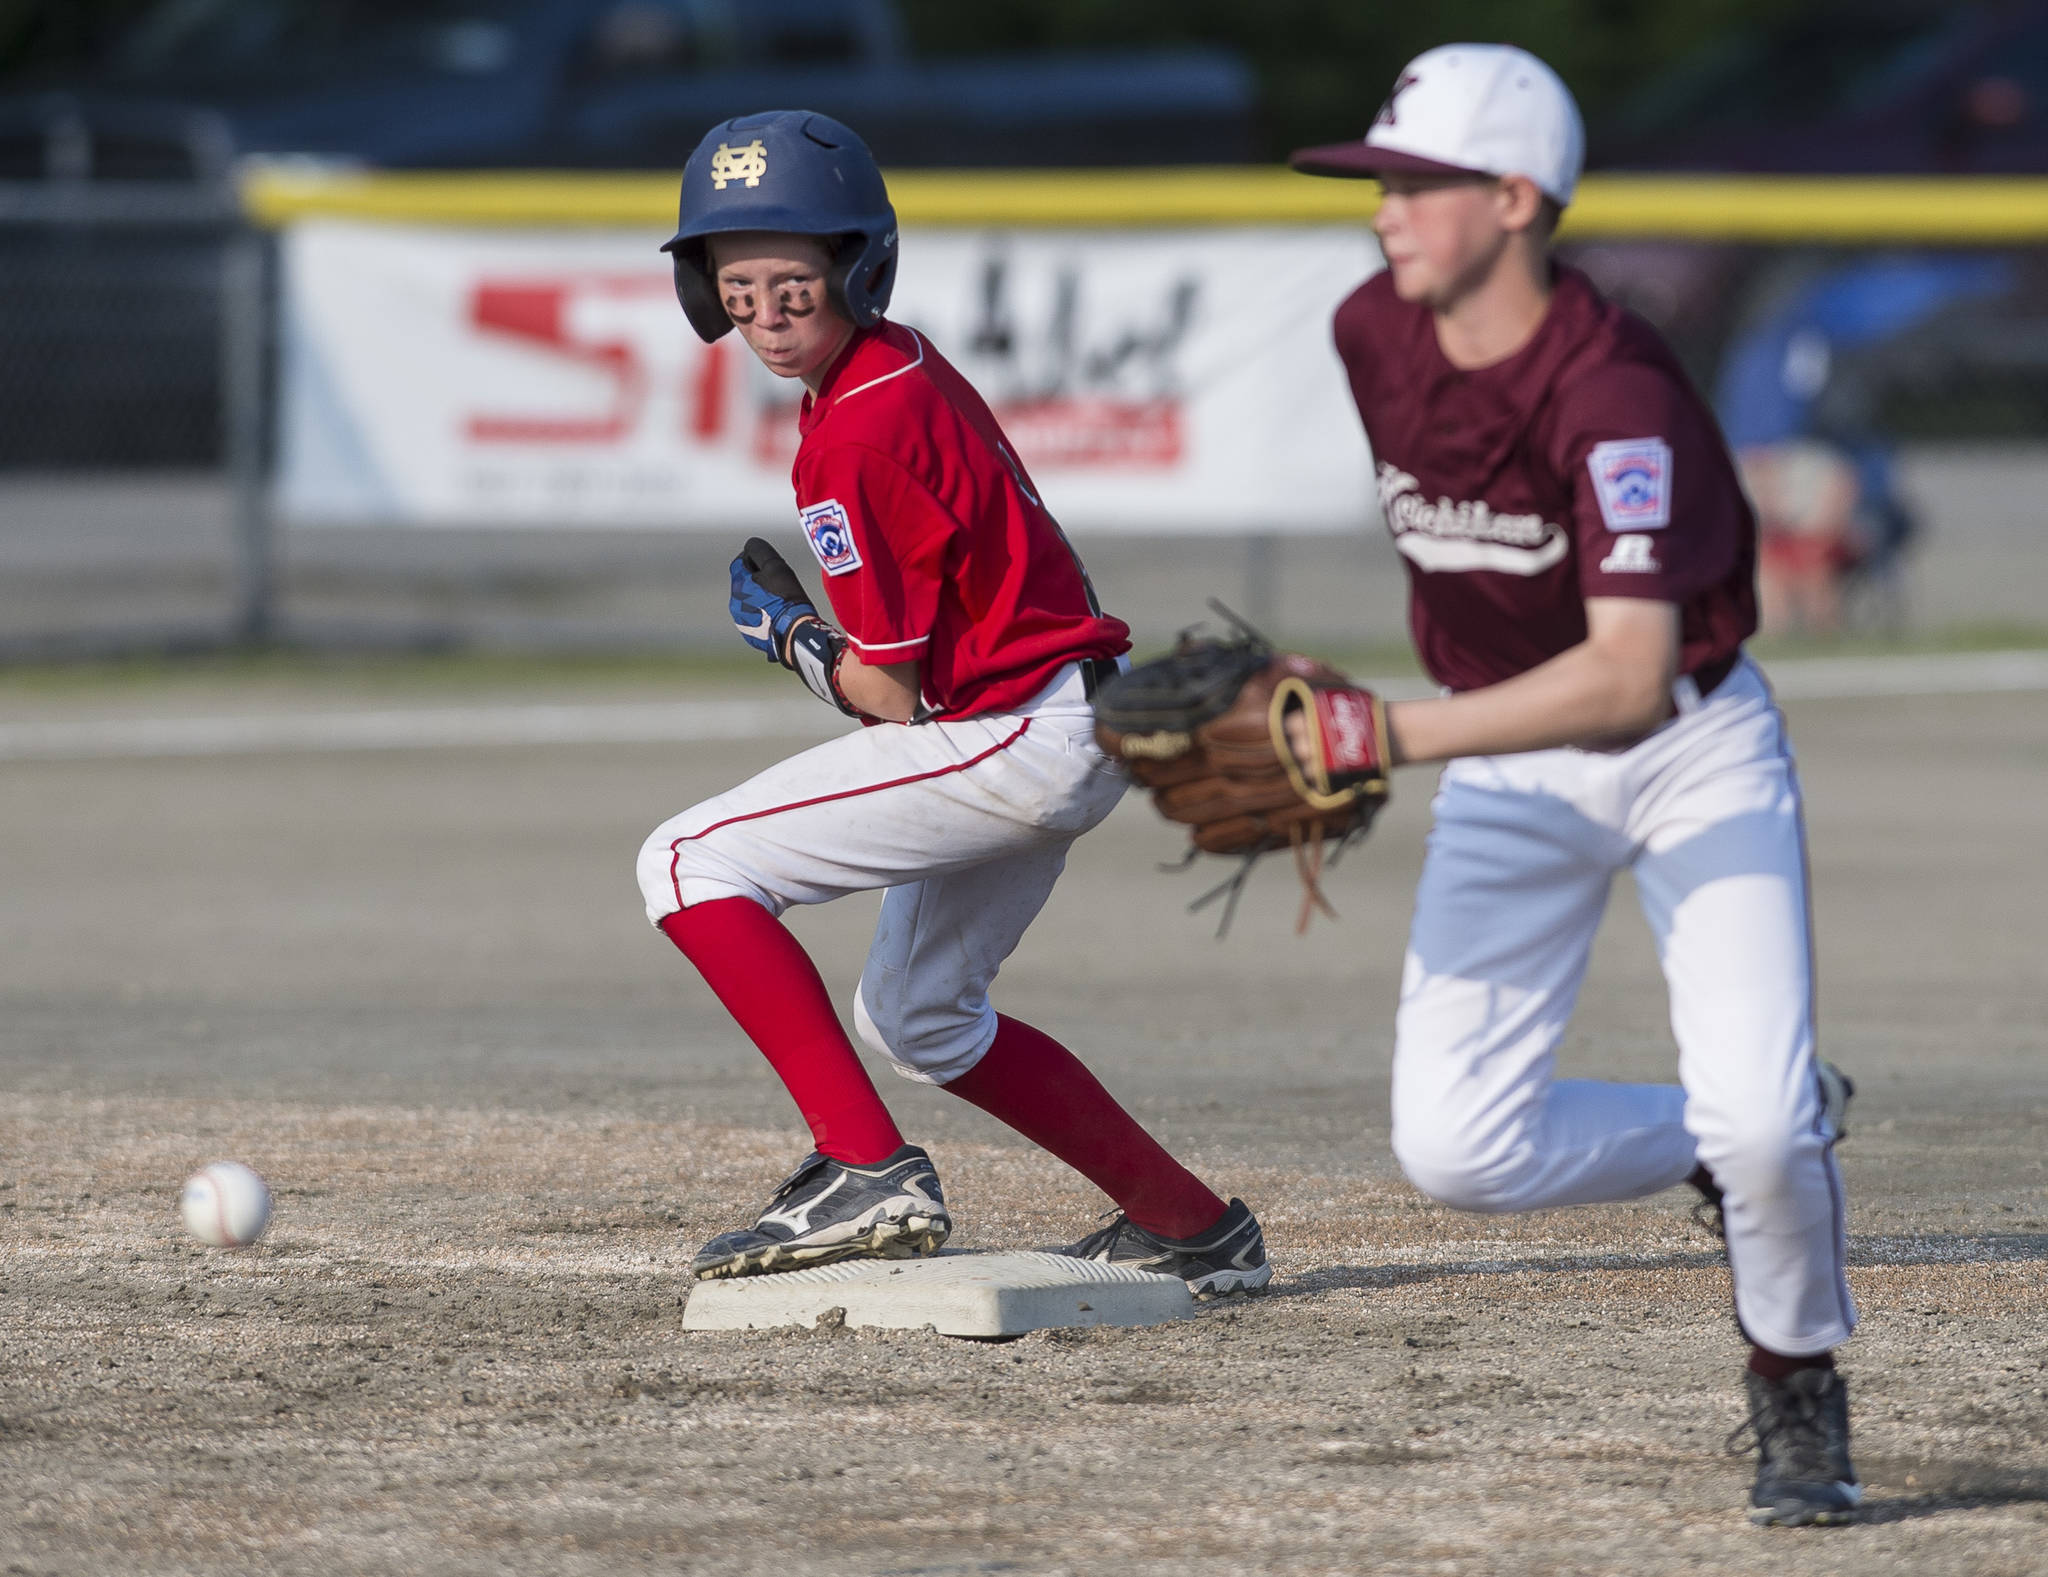 Gastineau Channel’s Kean Buss, left, steals second against Ketchikan’s shortstop Colton Shull in the third inning of the Alaska Major Baseball District 2 Championship Game at Miller Field on Tuesday. (Michael Penn | Juneau Empire)